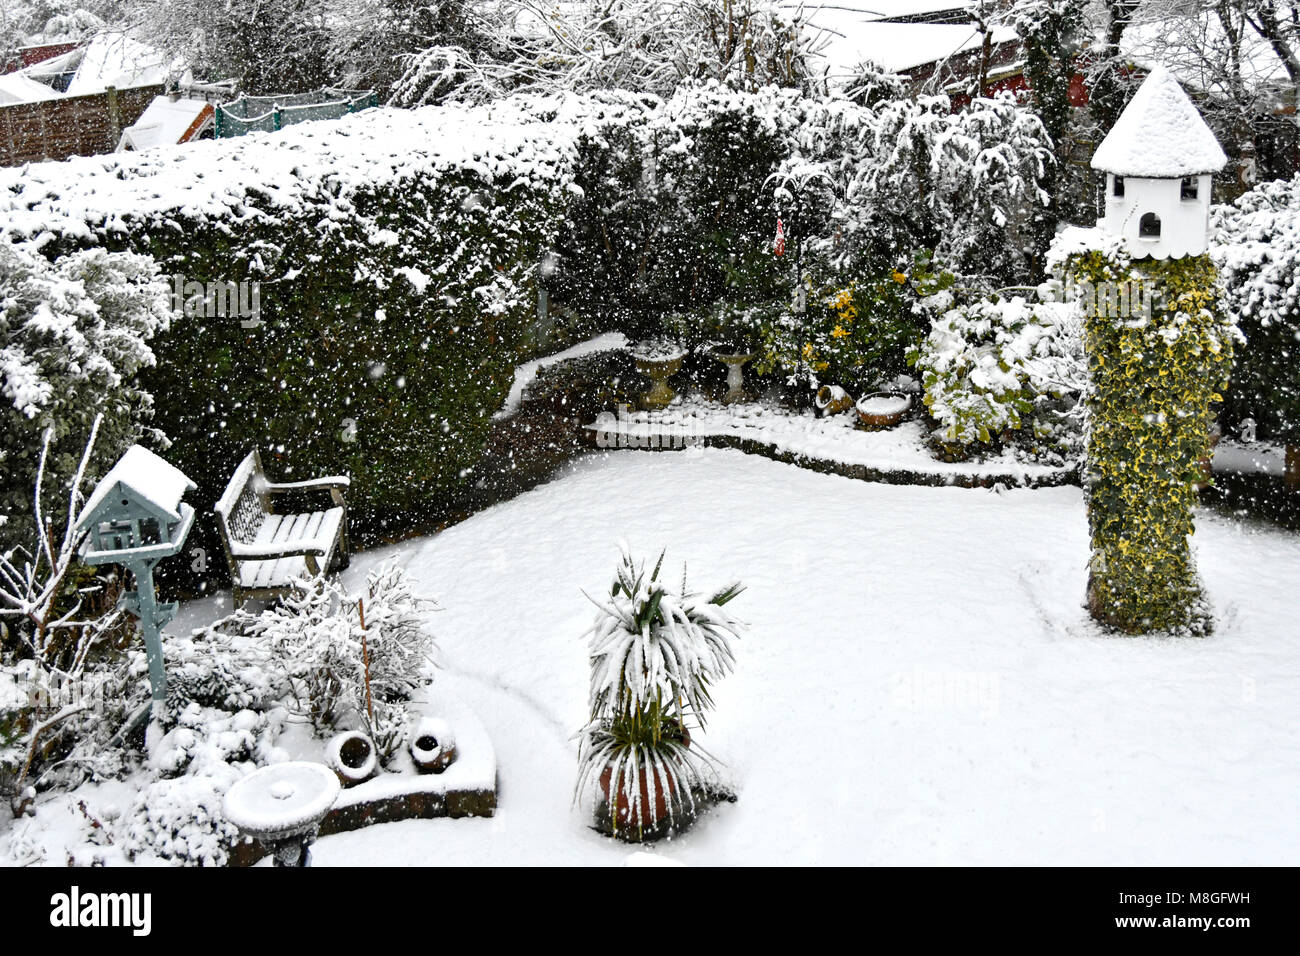 View from above looking down back garden grass lawn thuja plicata hedge & flower beds falling winter snow ivy grows up old tree stump Essex England UK Stock Photo